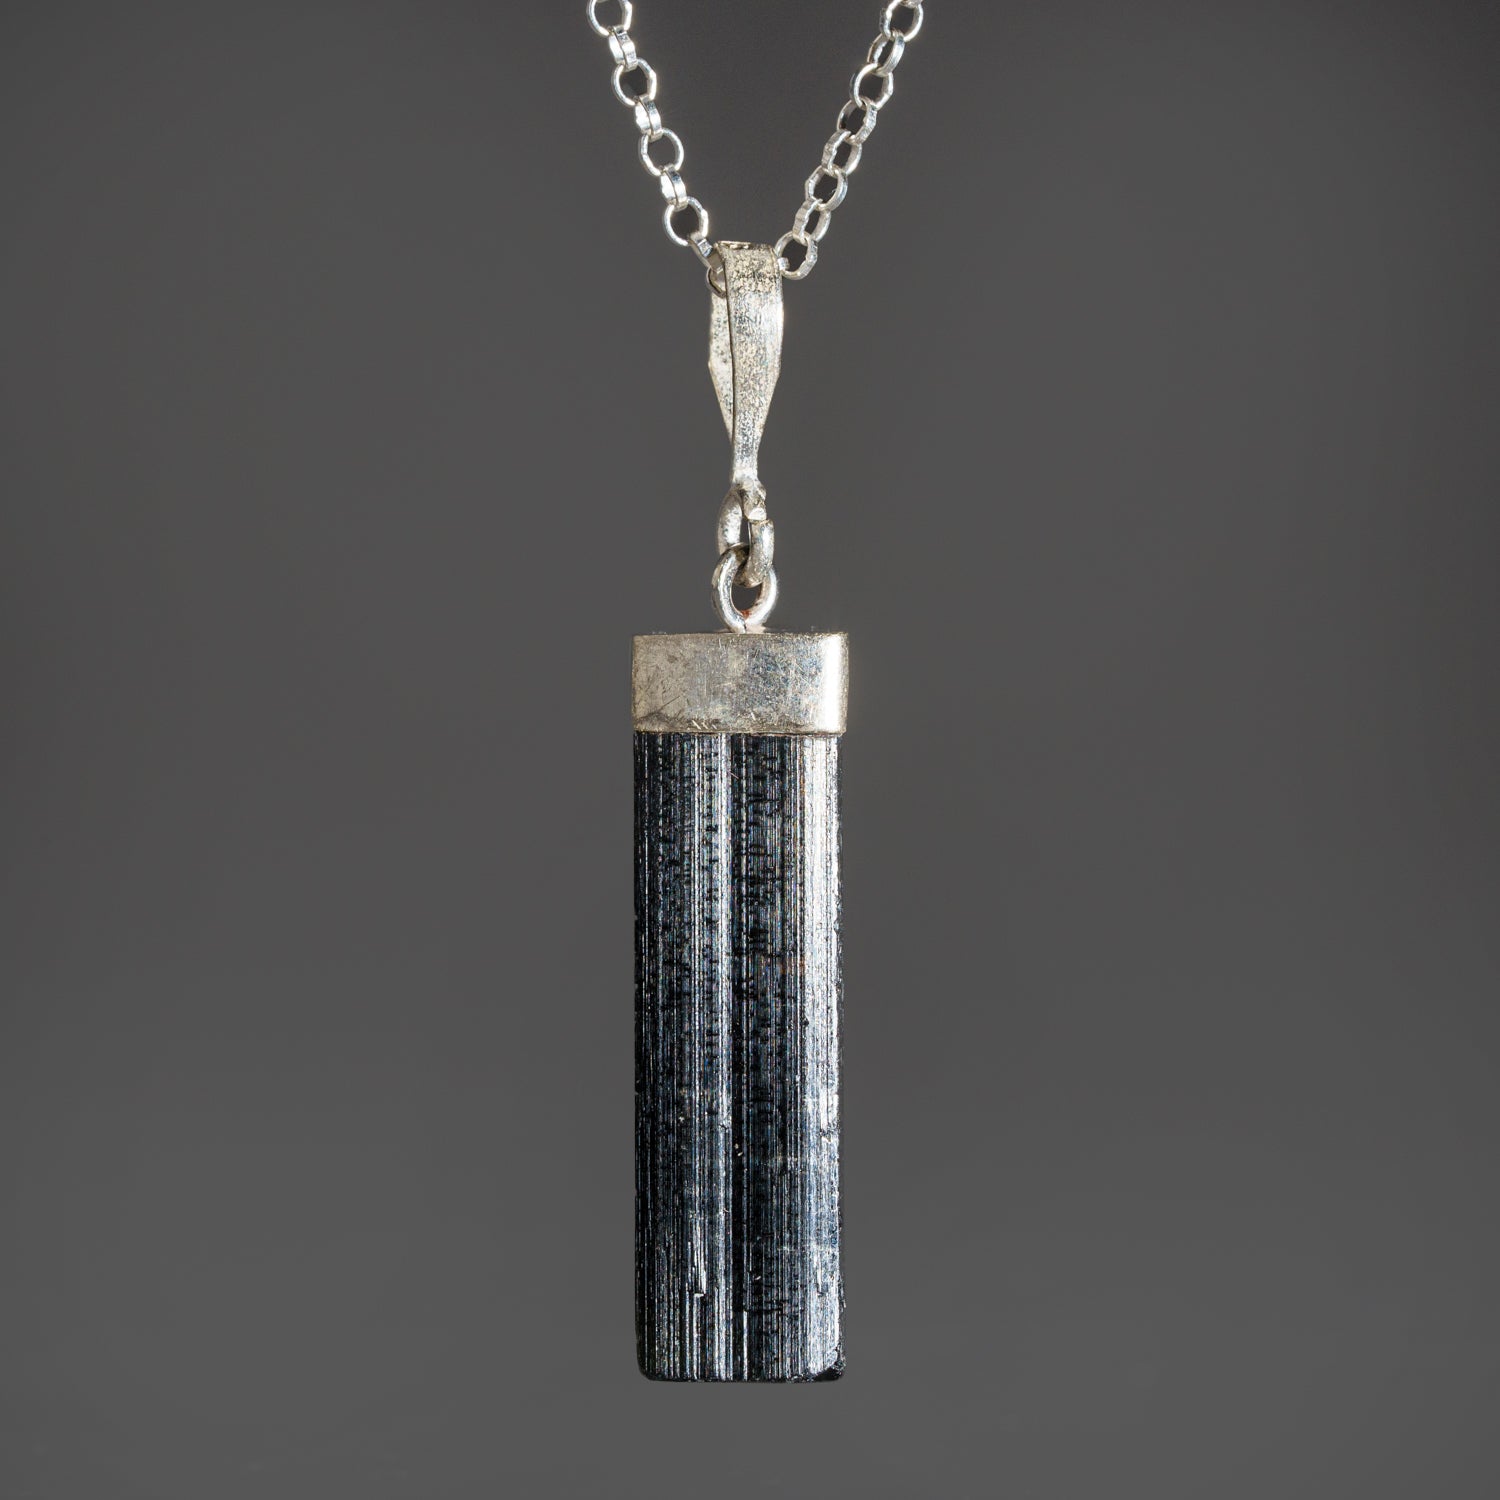 Genuine Black Tourmaline Pendant (3-5 grams) with 18" Sterling Silver Chain